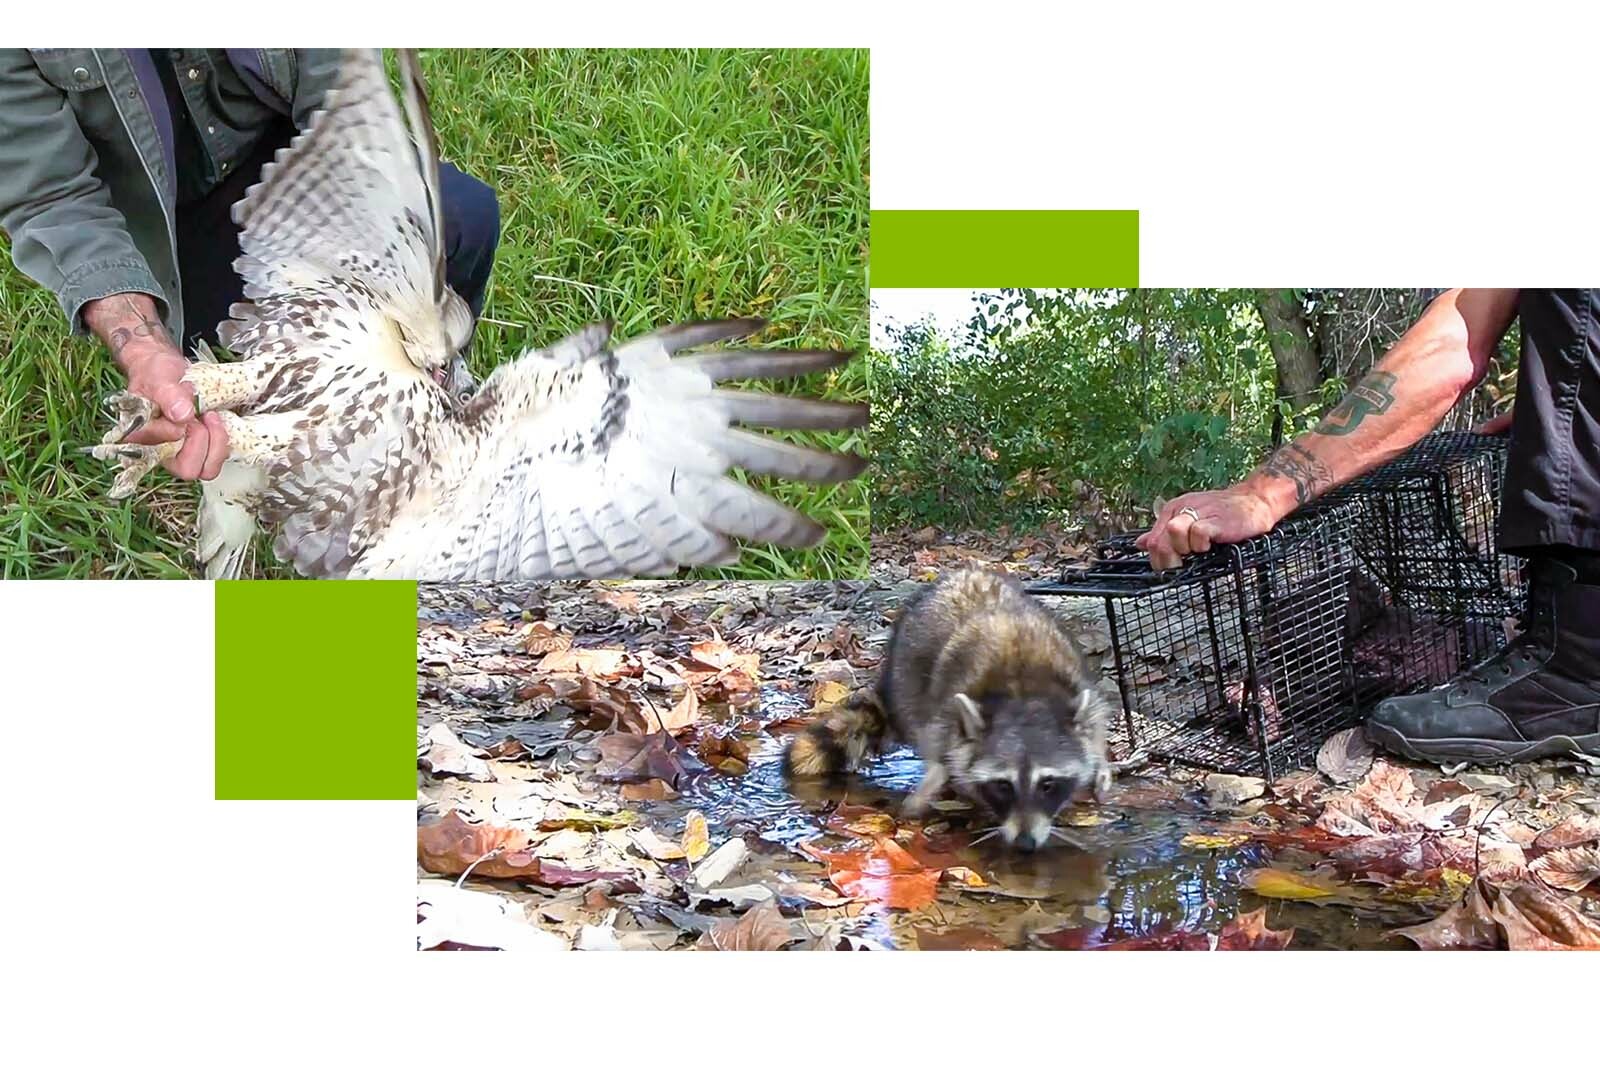 a photo of a man holding the feet of a hawk with its wings outstretched, and a photo of a man releasing a raccoon into the woods